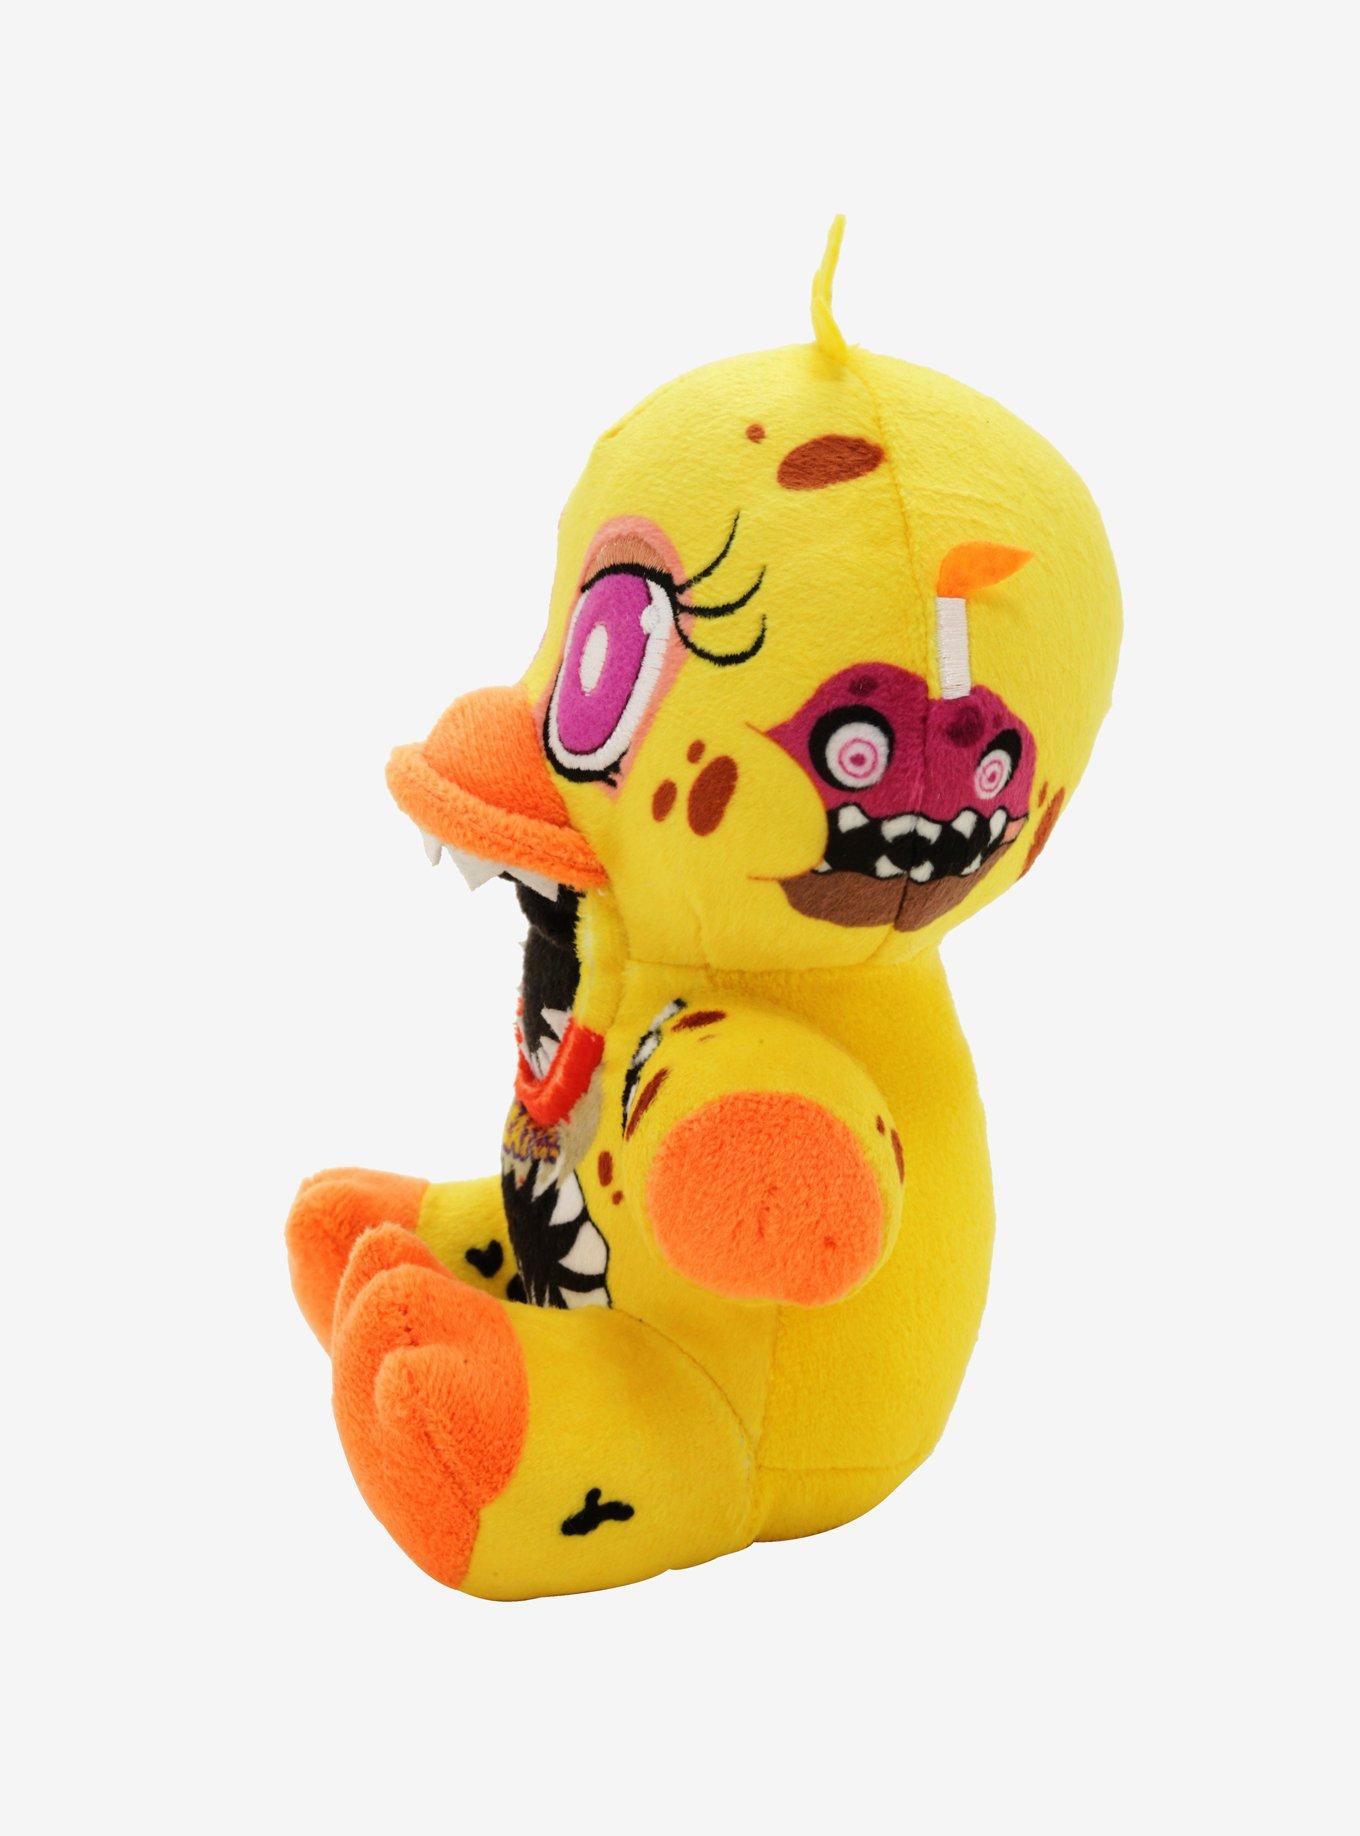 Five Nights At Freddy's Twisted Chica Soft Stuffed Plush Toy